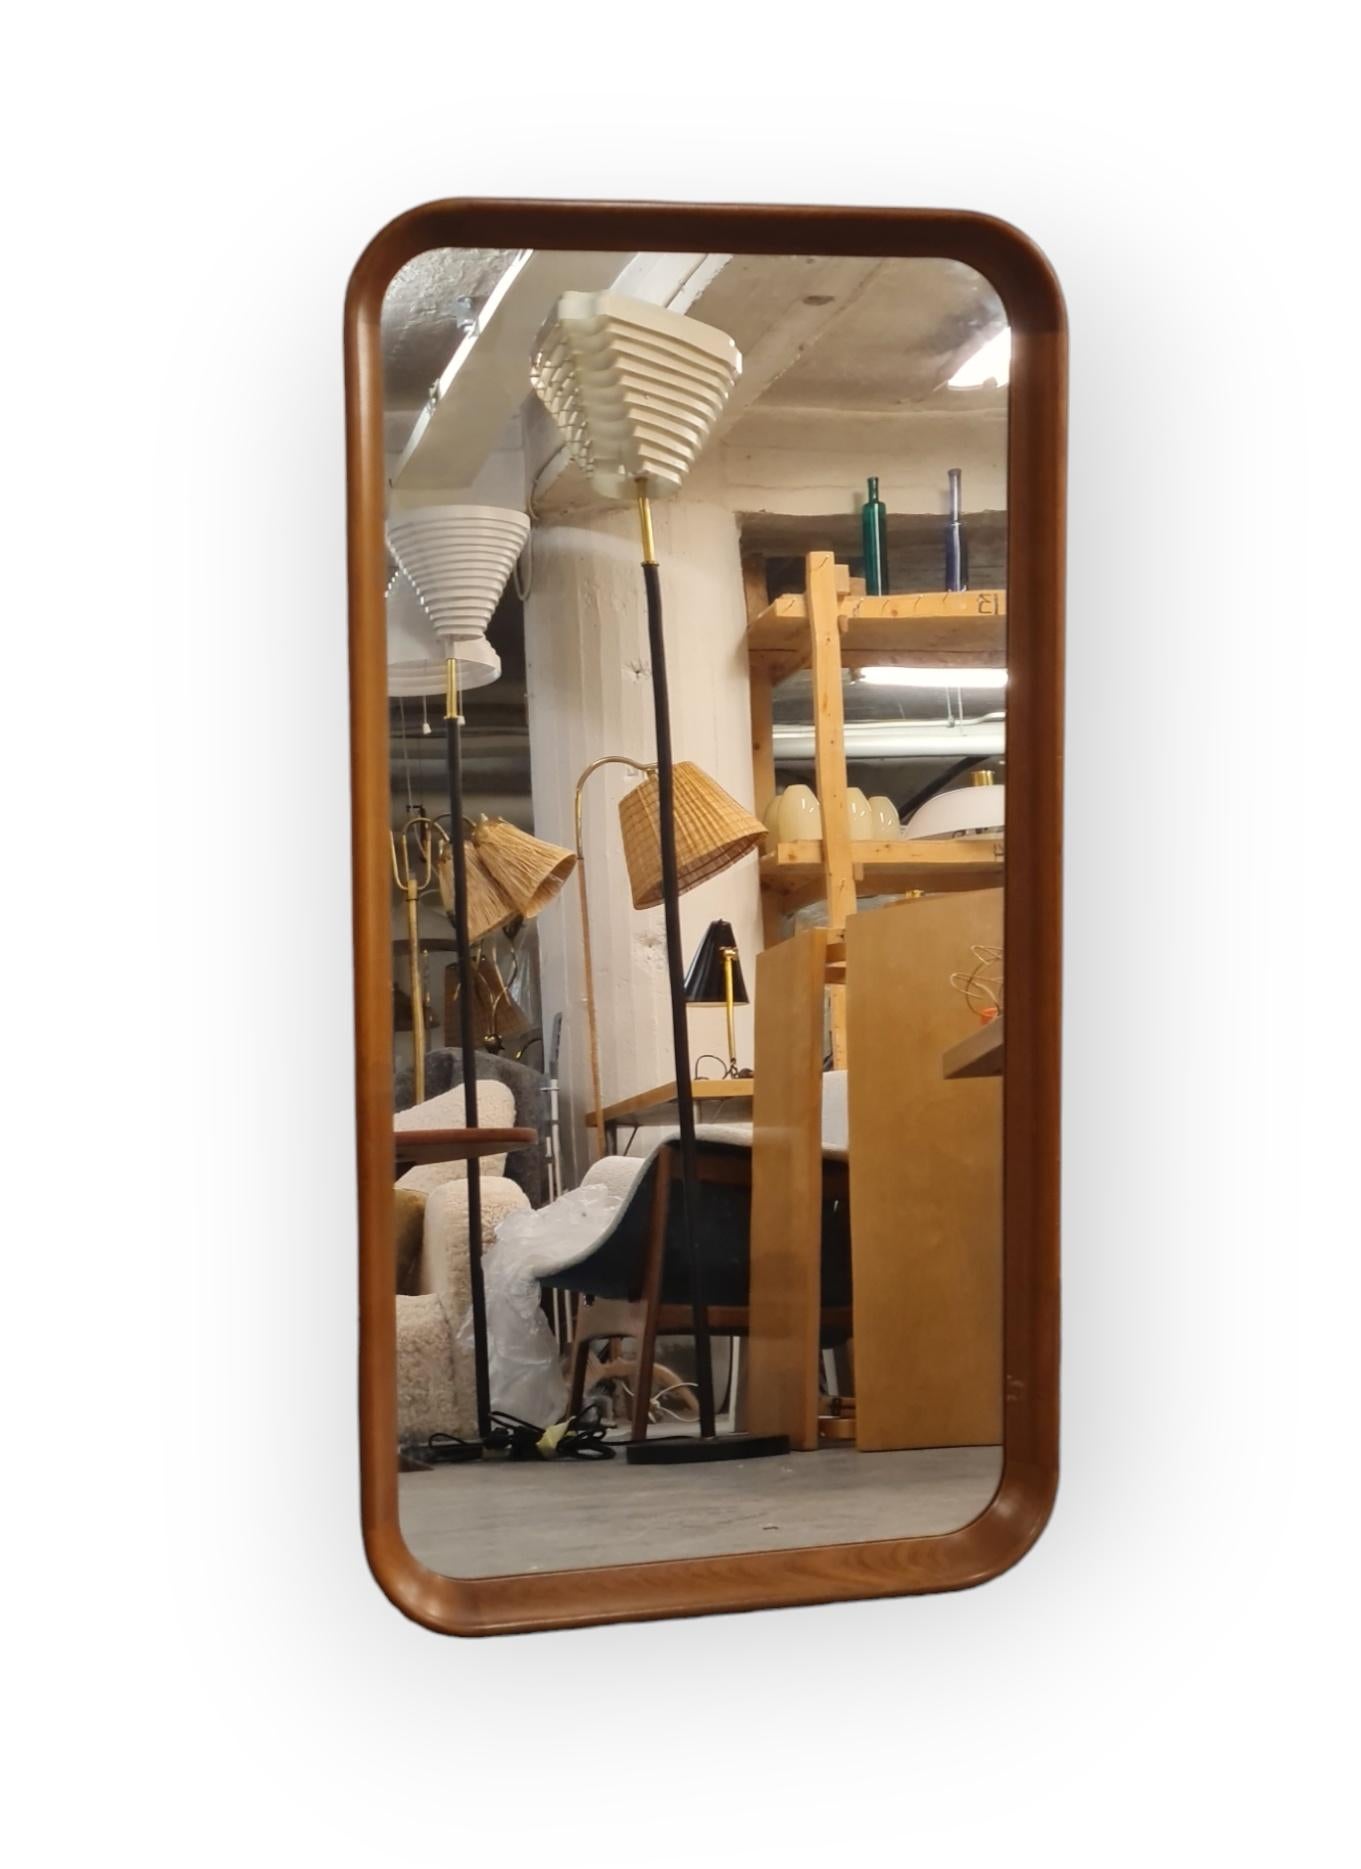 A beautiful minimalist modern mirror in a teak frame designed by Olof Ottelin, who was a designer and the director of the Stockmann furniture design department store. The mirror was produced by Keravan Puuseppätehdas. 
For minimalist lover's,  here